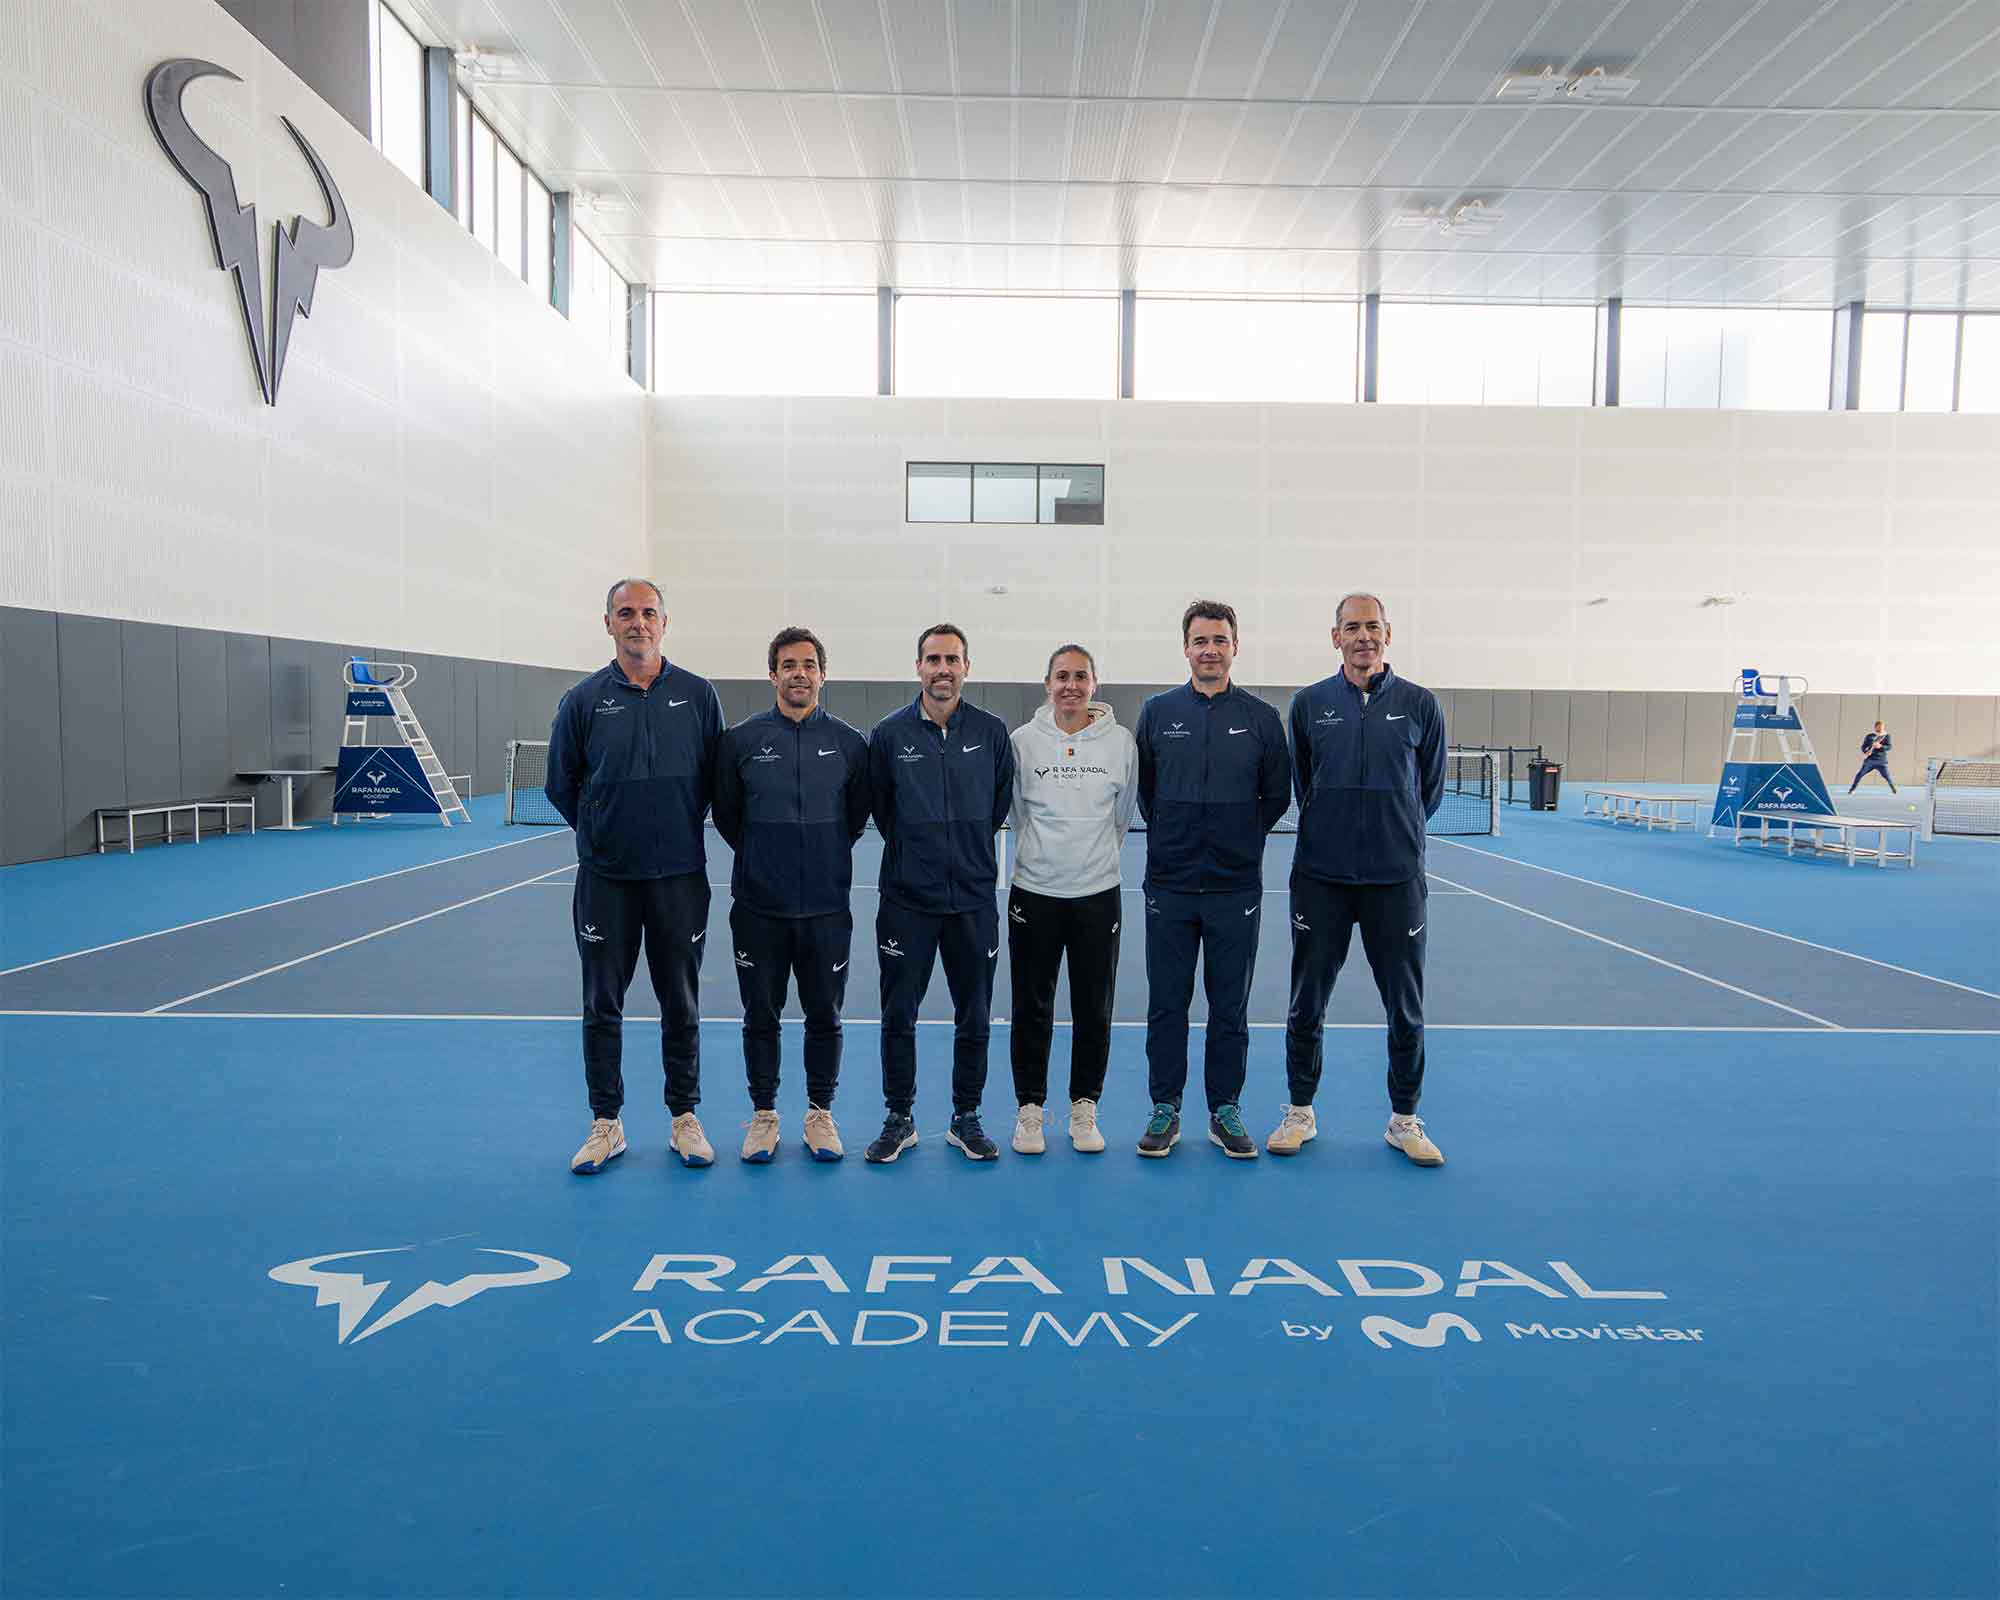 Who are the Head Coaches of the Rafa Nadal Academy by Movistar annual program?